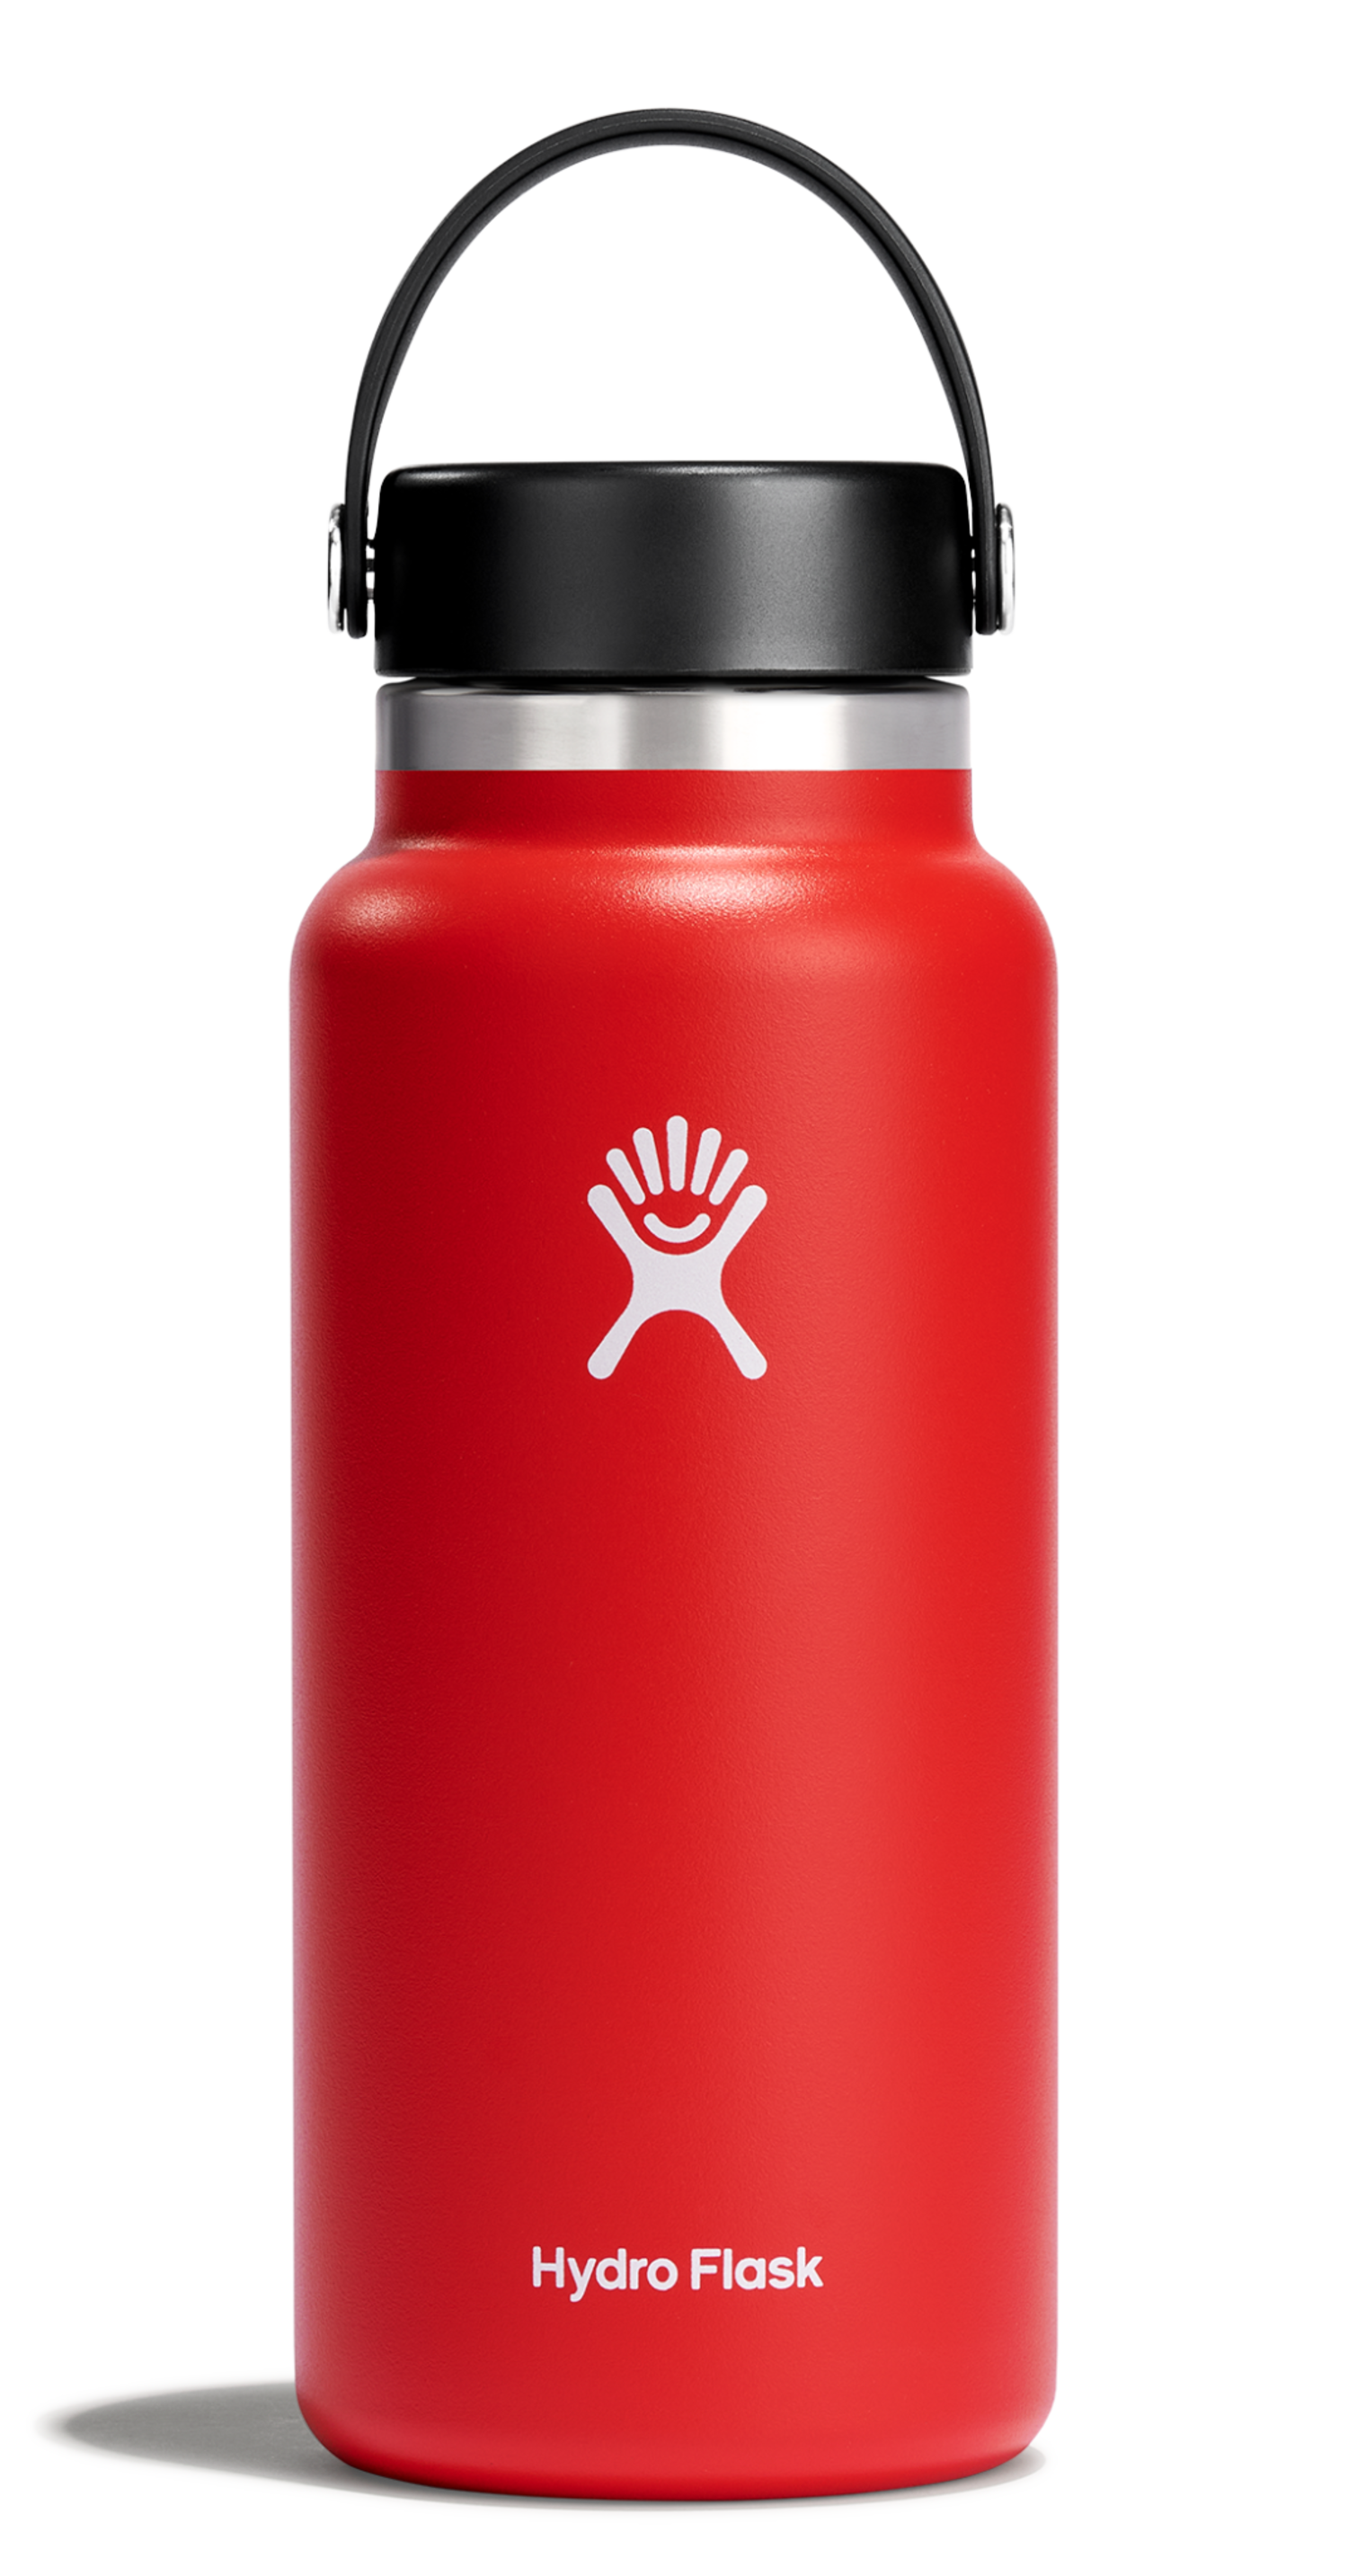 32 oz Wide Mouth Hydroflask - White-971834